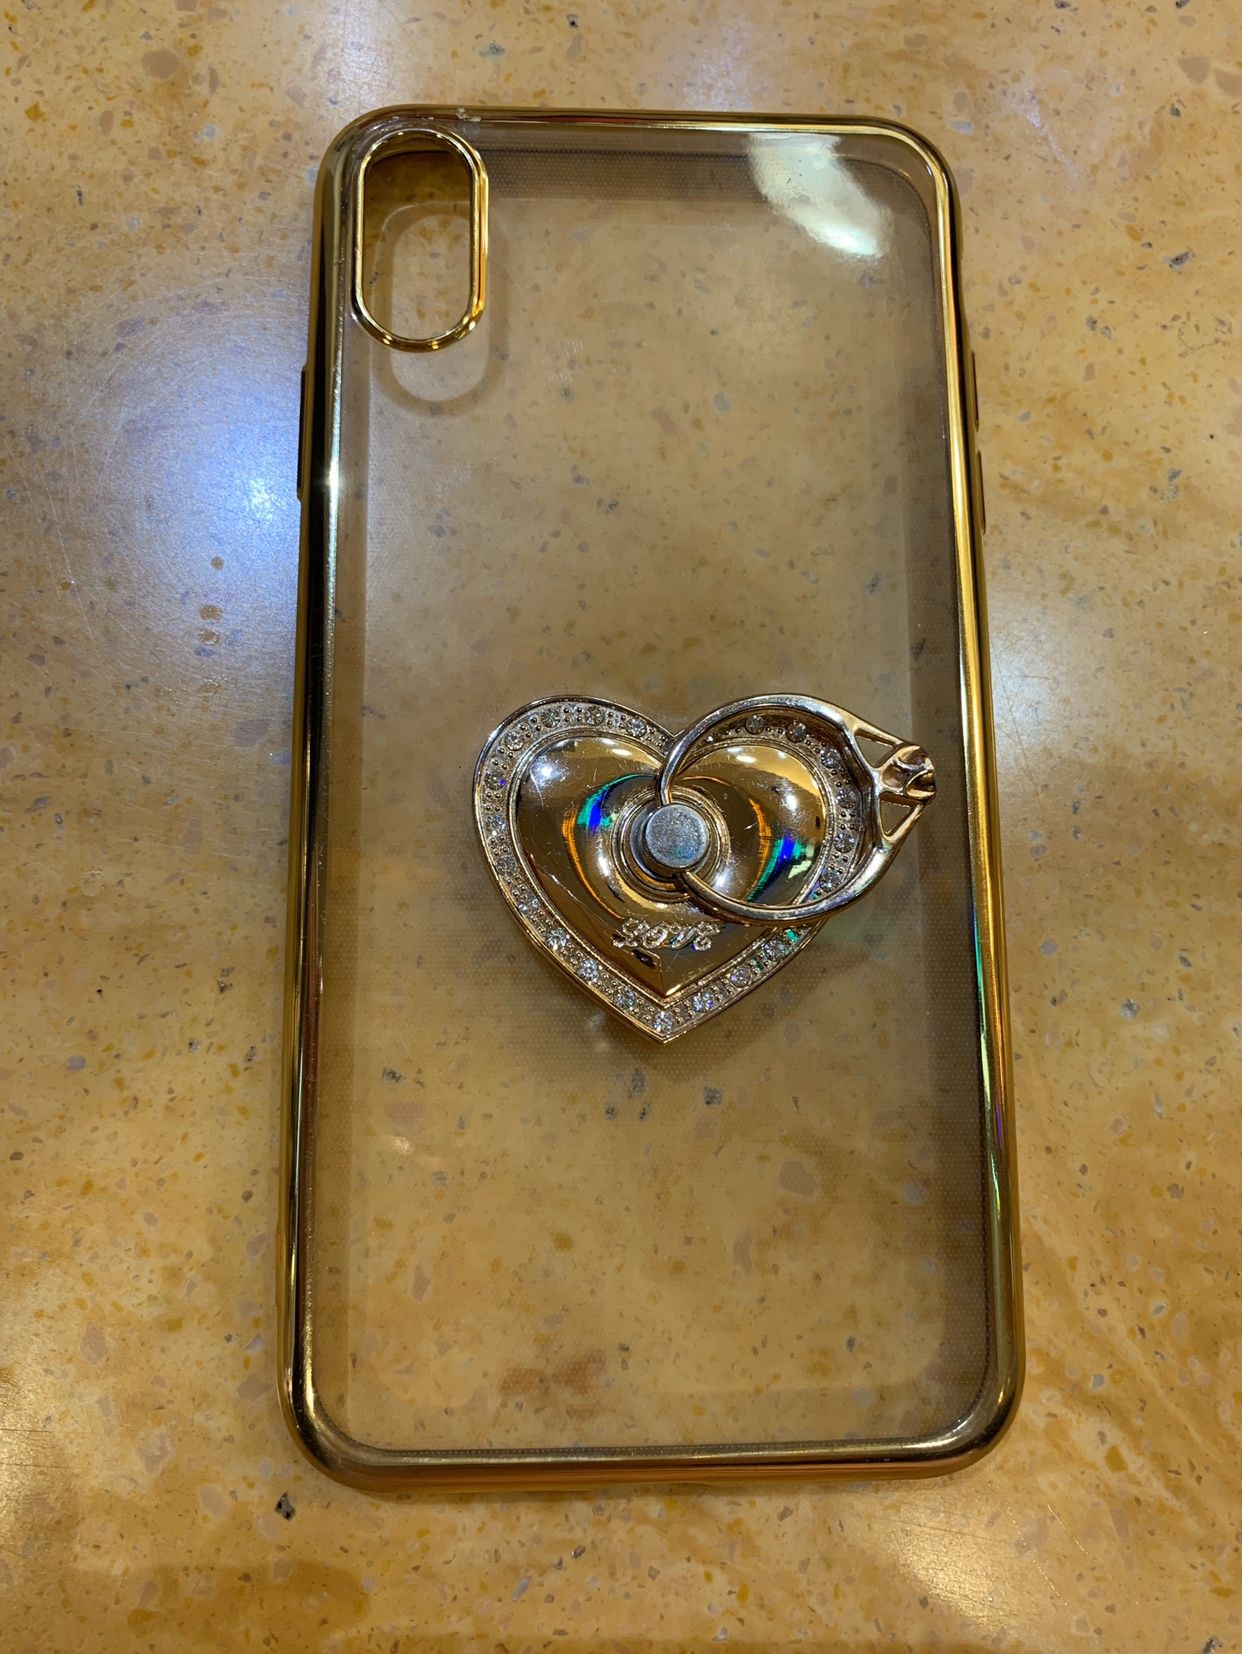 FREE Iphone XS Max Case Gold Trim clear back with a heart & ring holder Pick Up in Pico Rivera Only